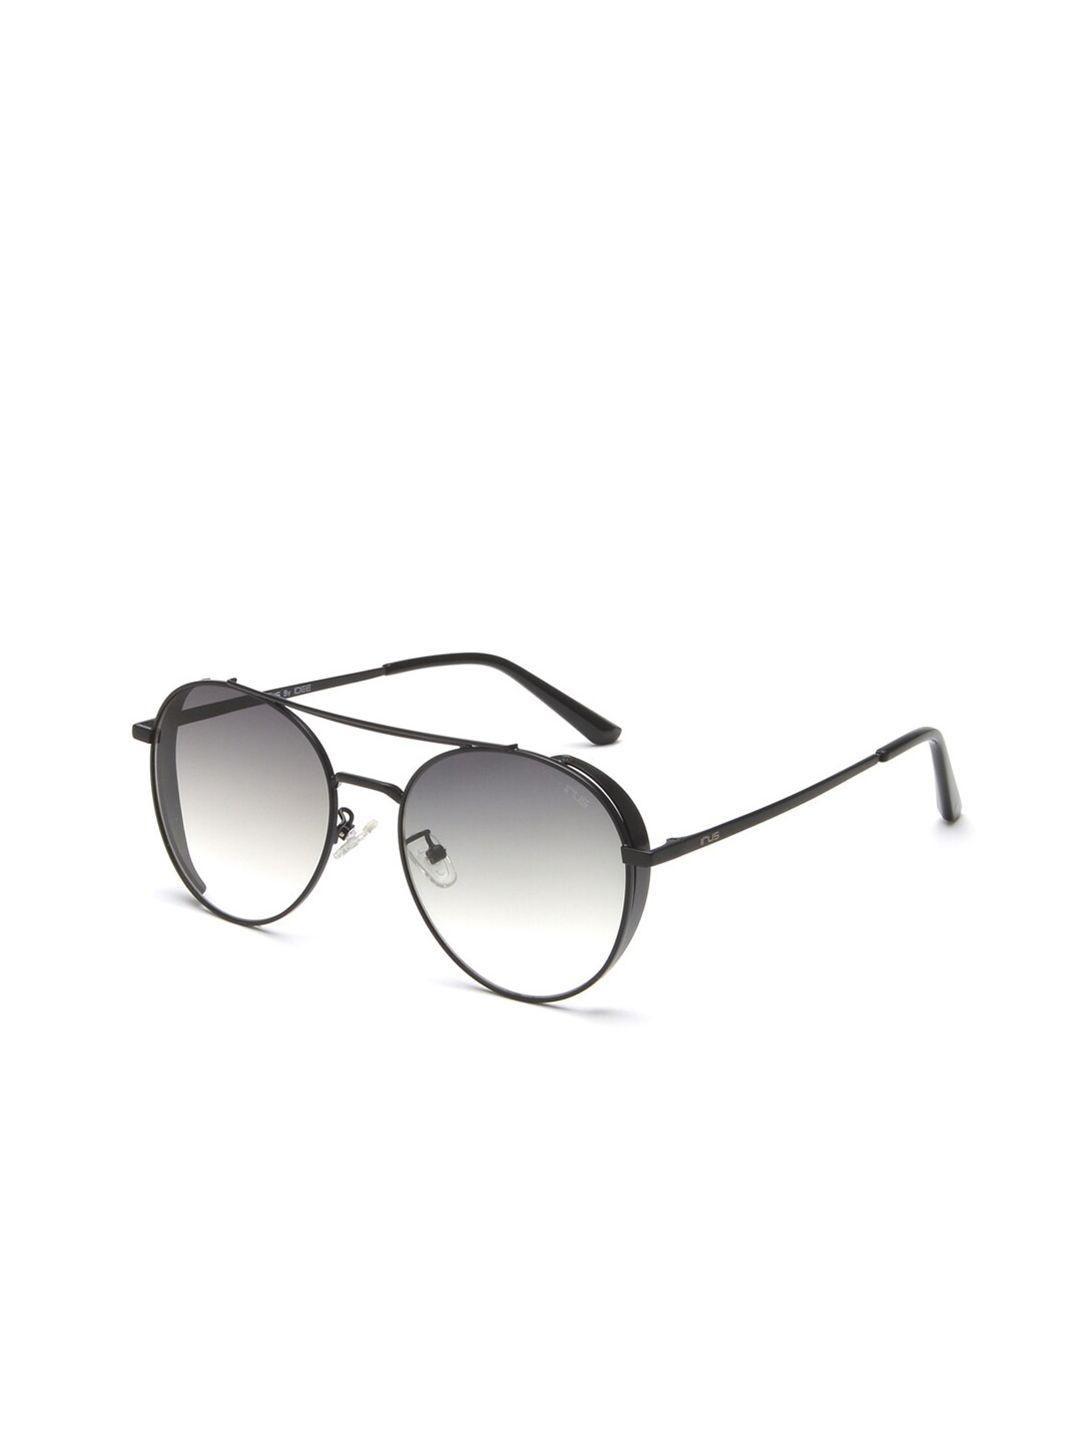 irus-by-idee-men-round-sunglasses-with-uv-protected-lens-irs1092c1sg